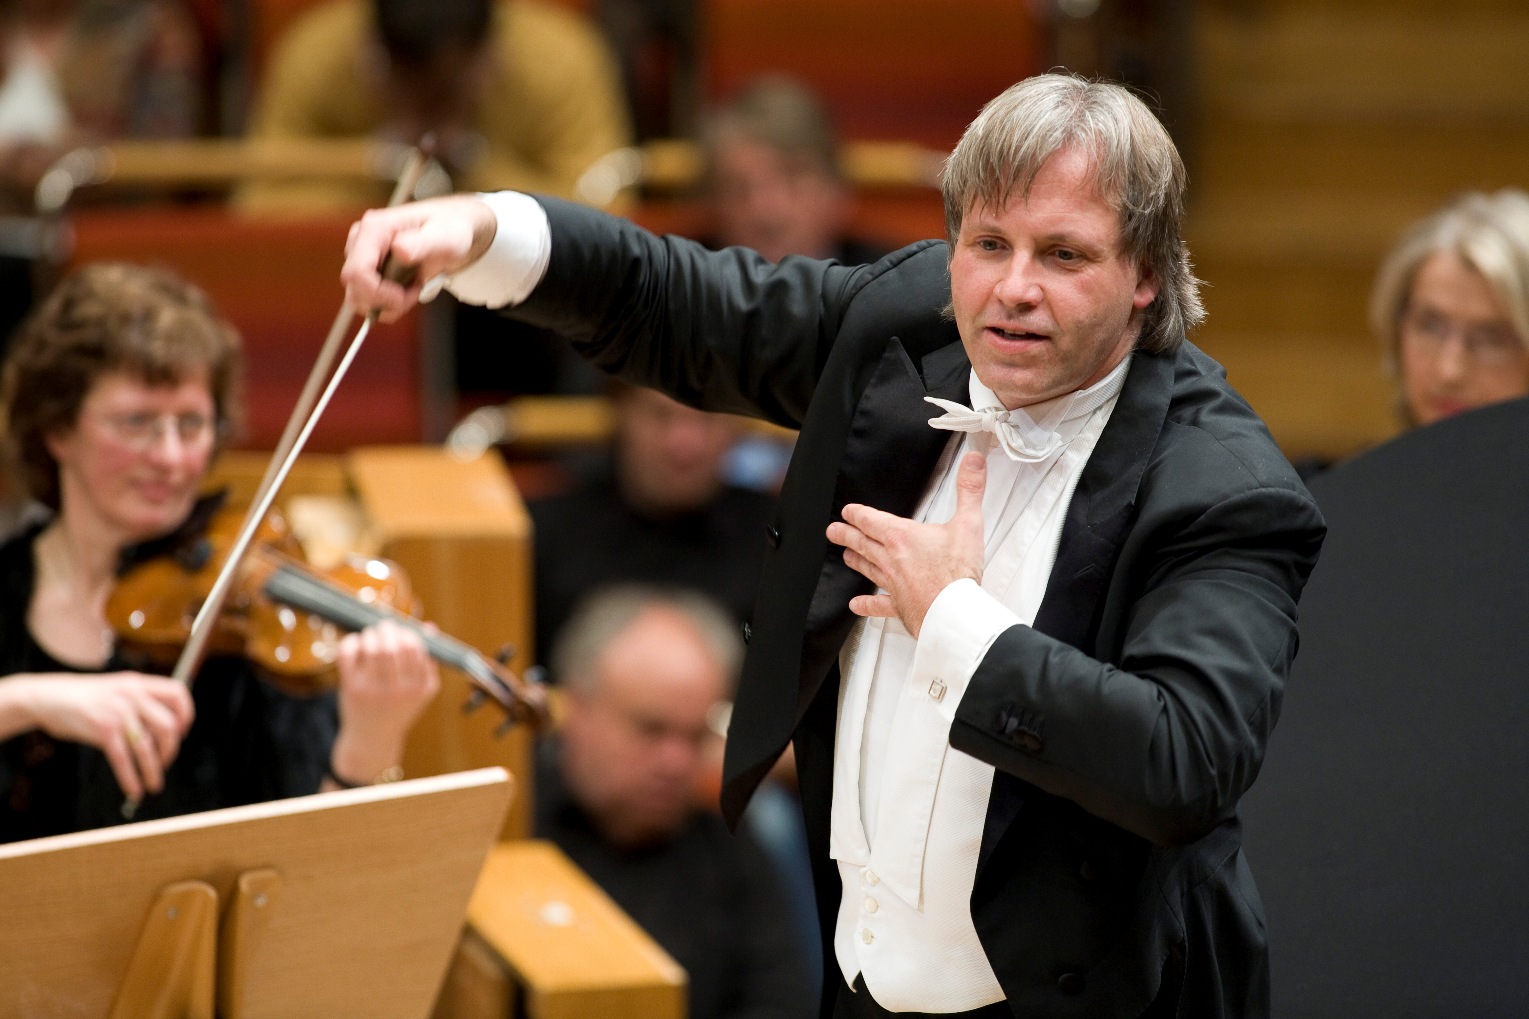 Stenz conducting the Halle